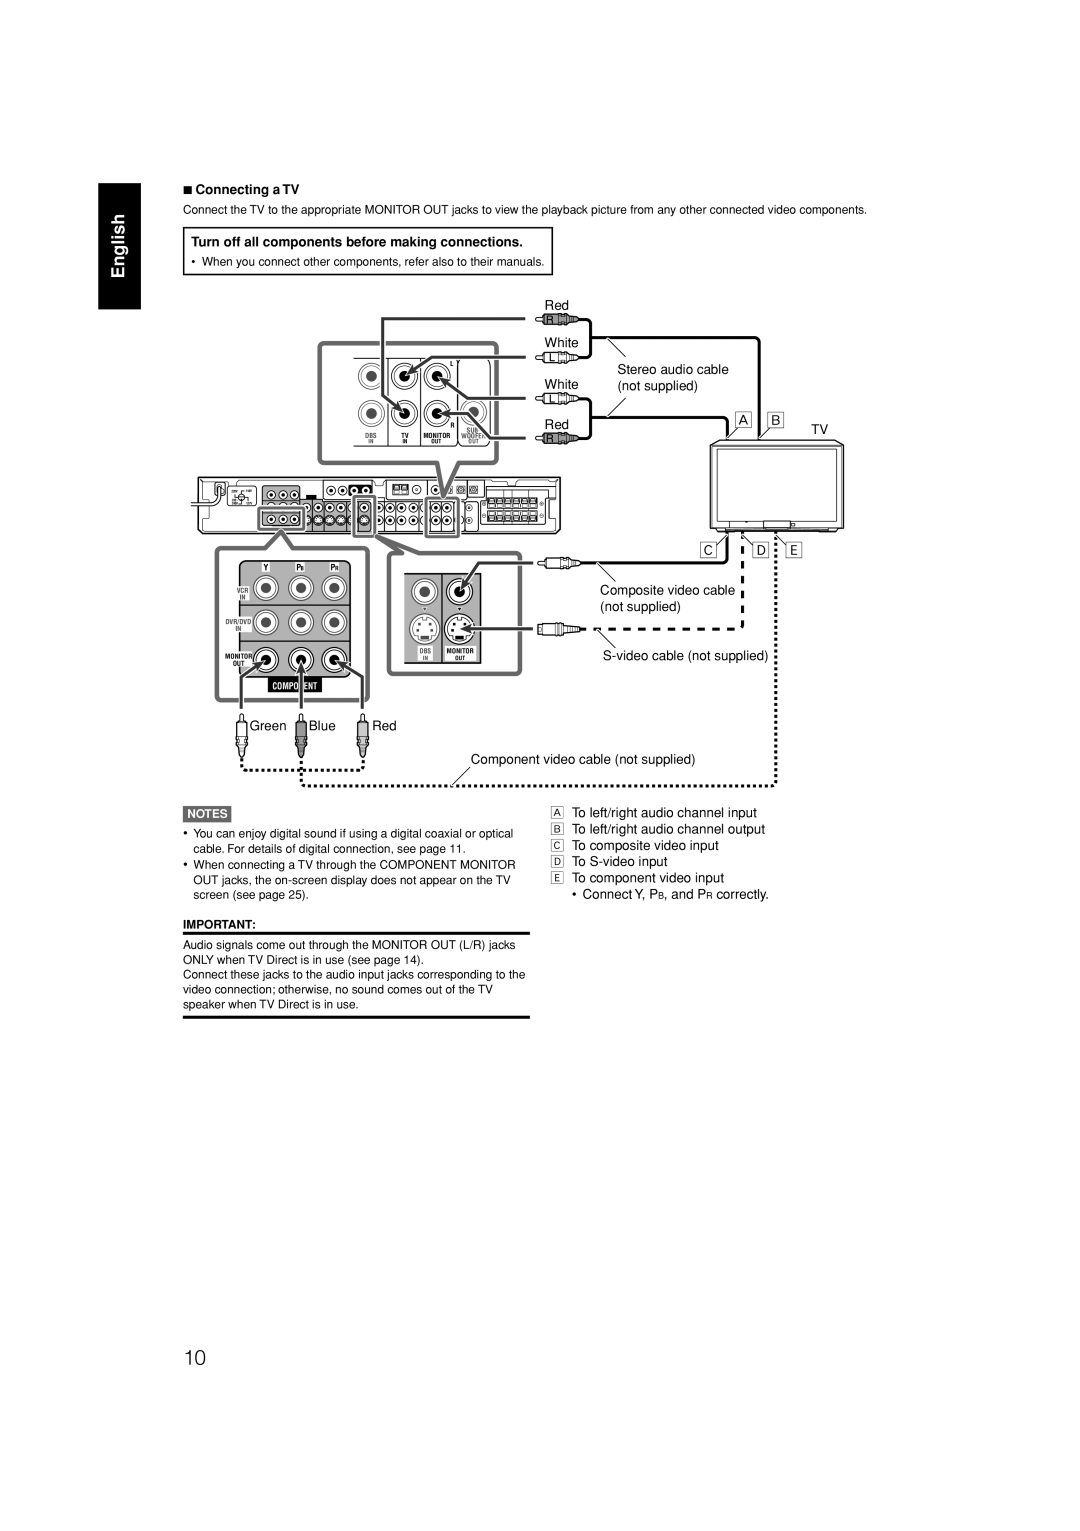 JVC RX-F31S manual English, 7Connecting a TV, Turn off all components before making connections 